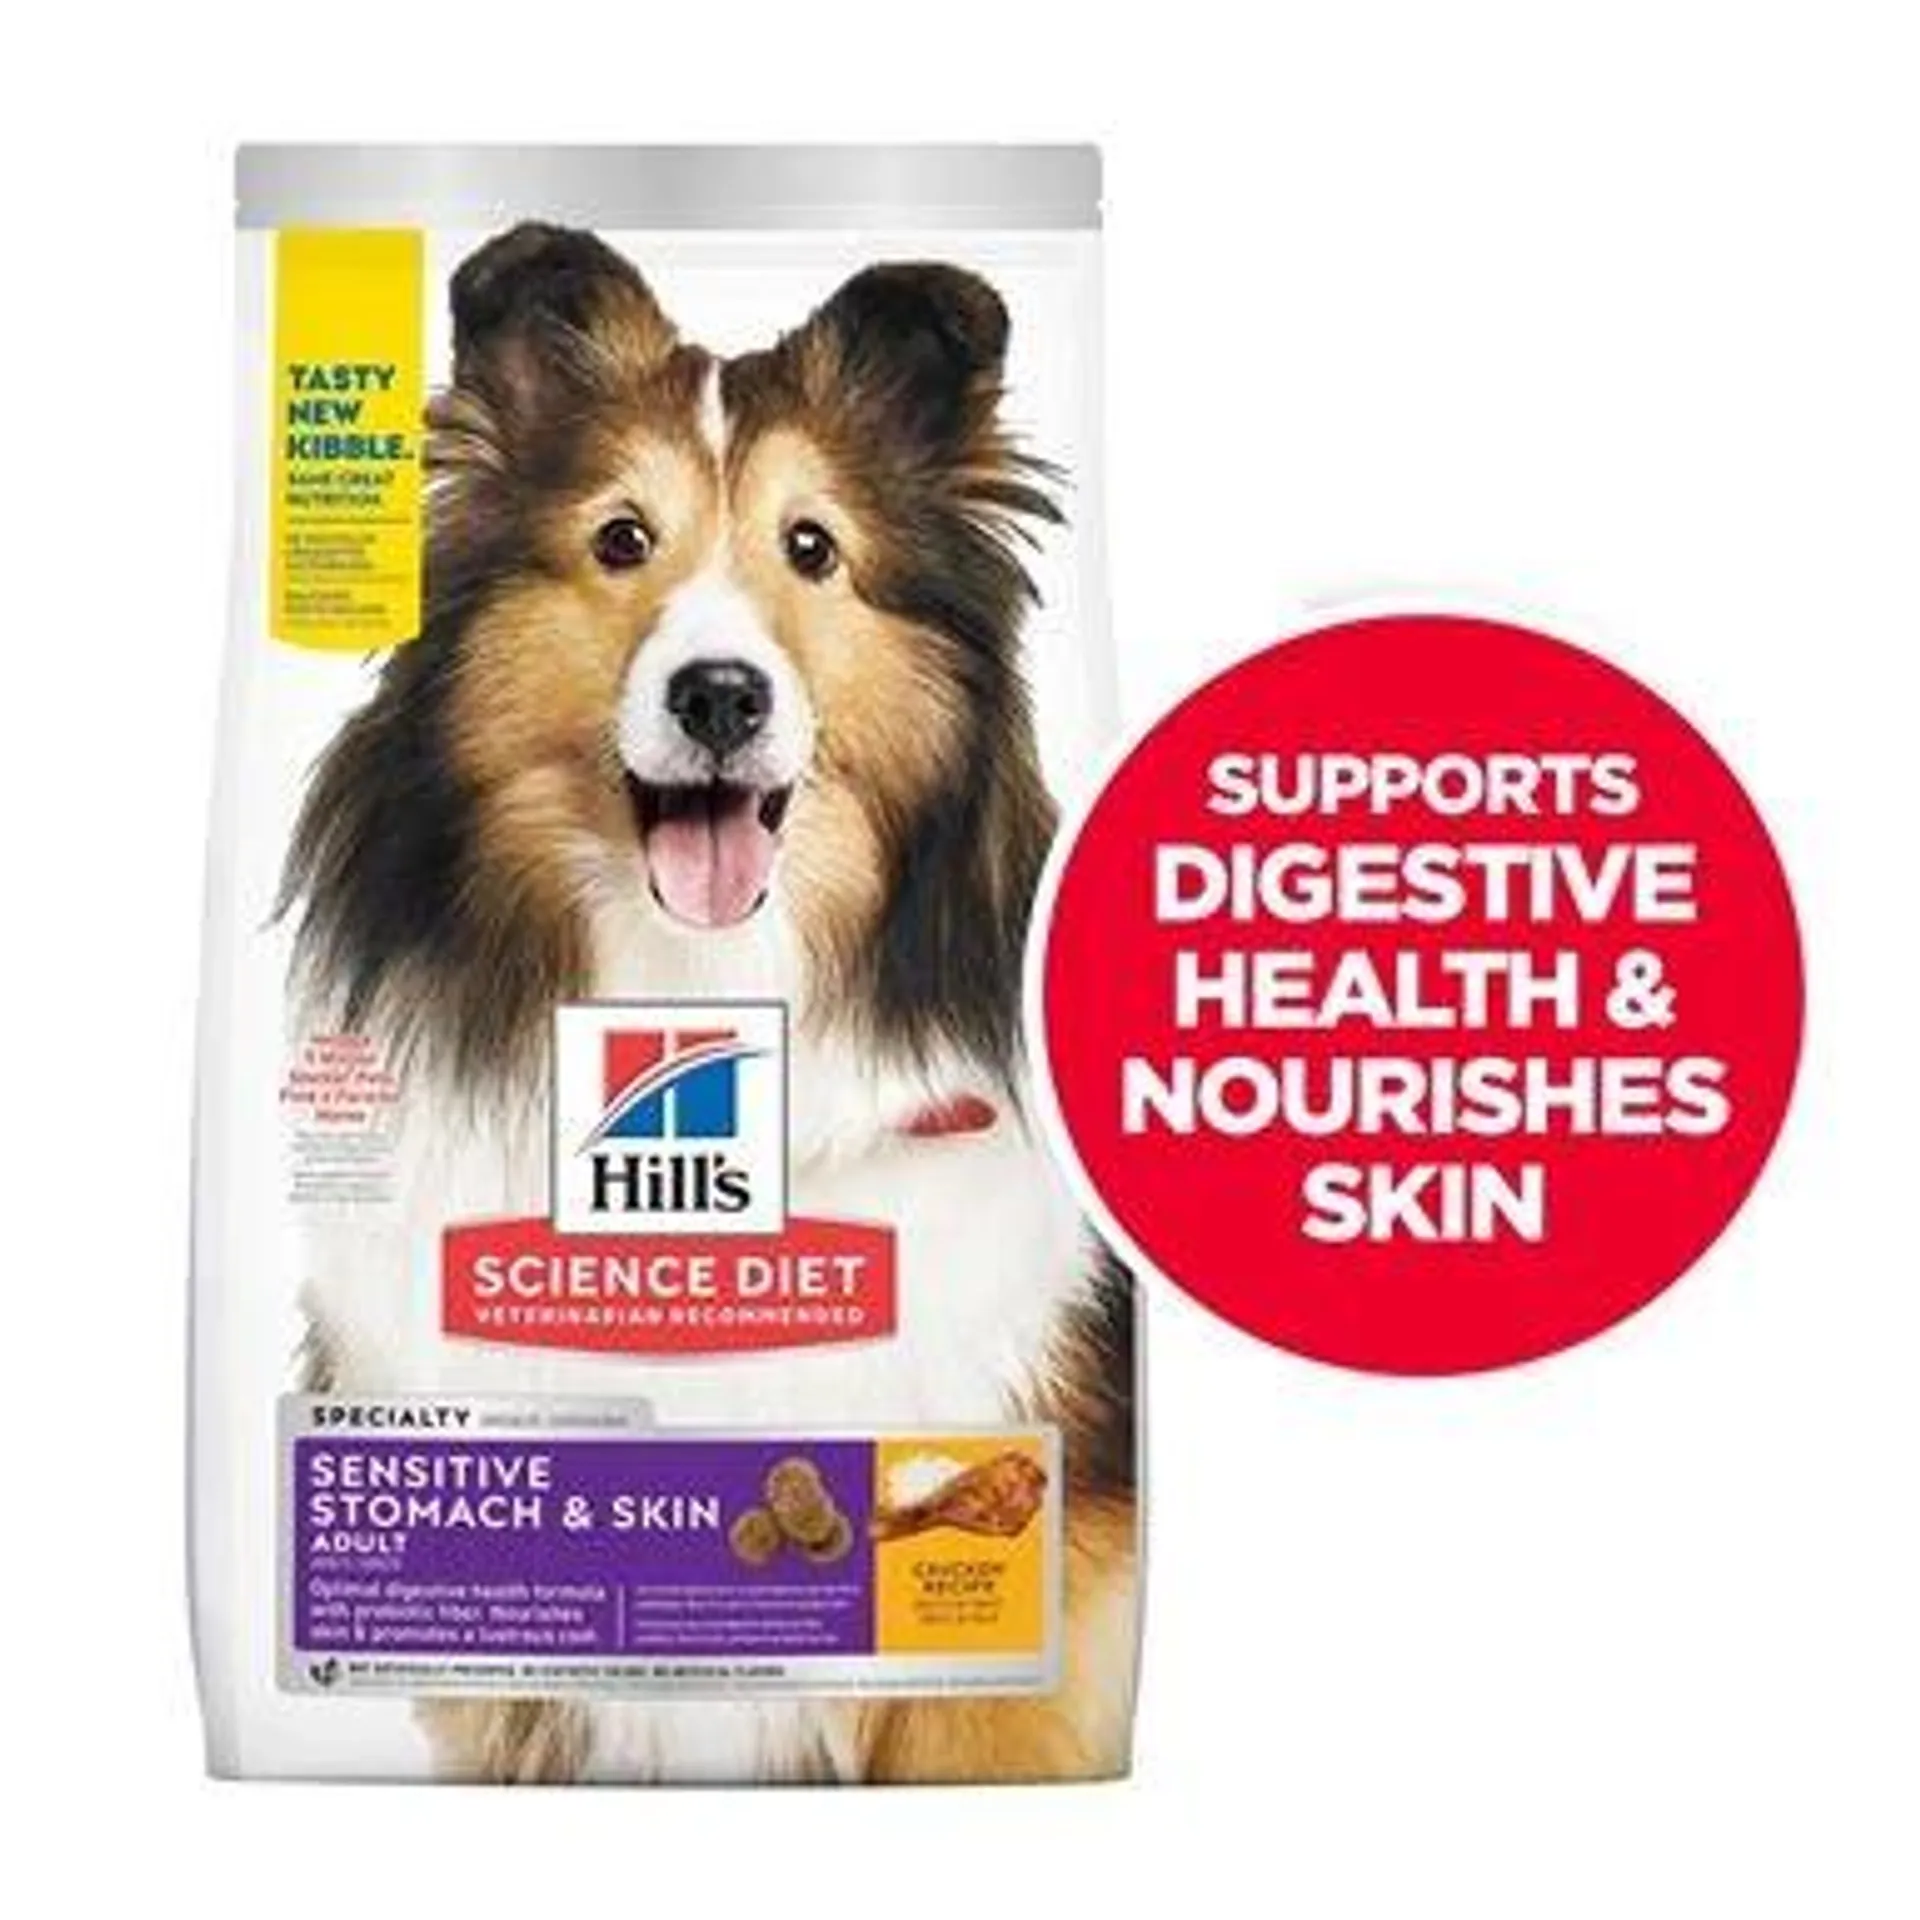 Hill's Science Diet Adult Sensitive Stomach & Skin Dry Dog Food, Chicken Recipe, 15.5 Pound Bag